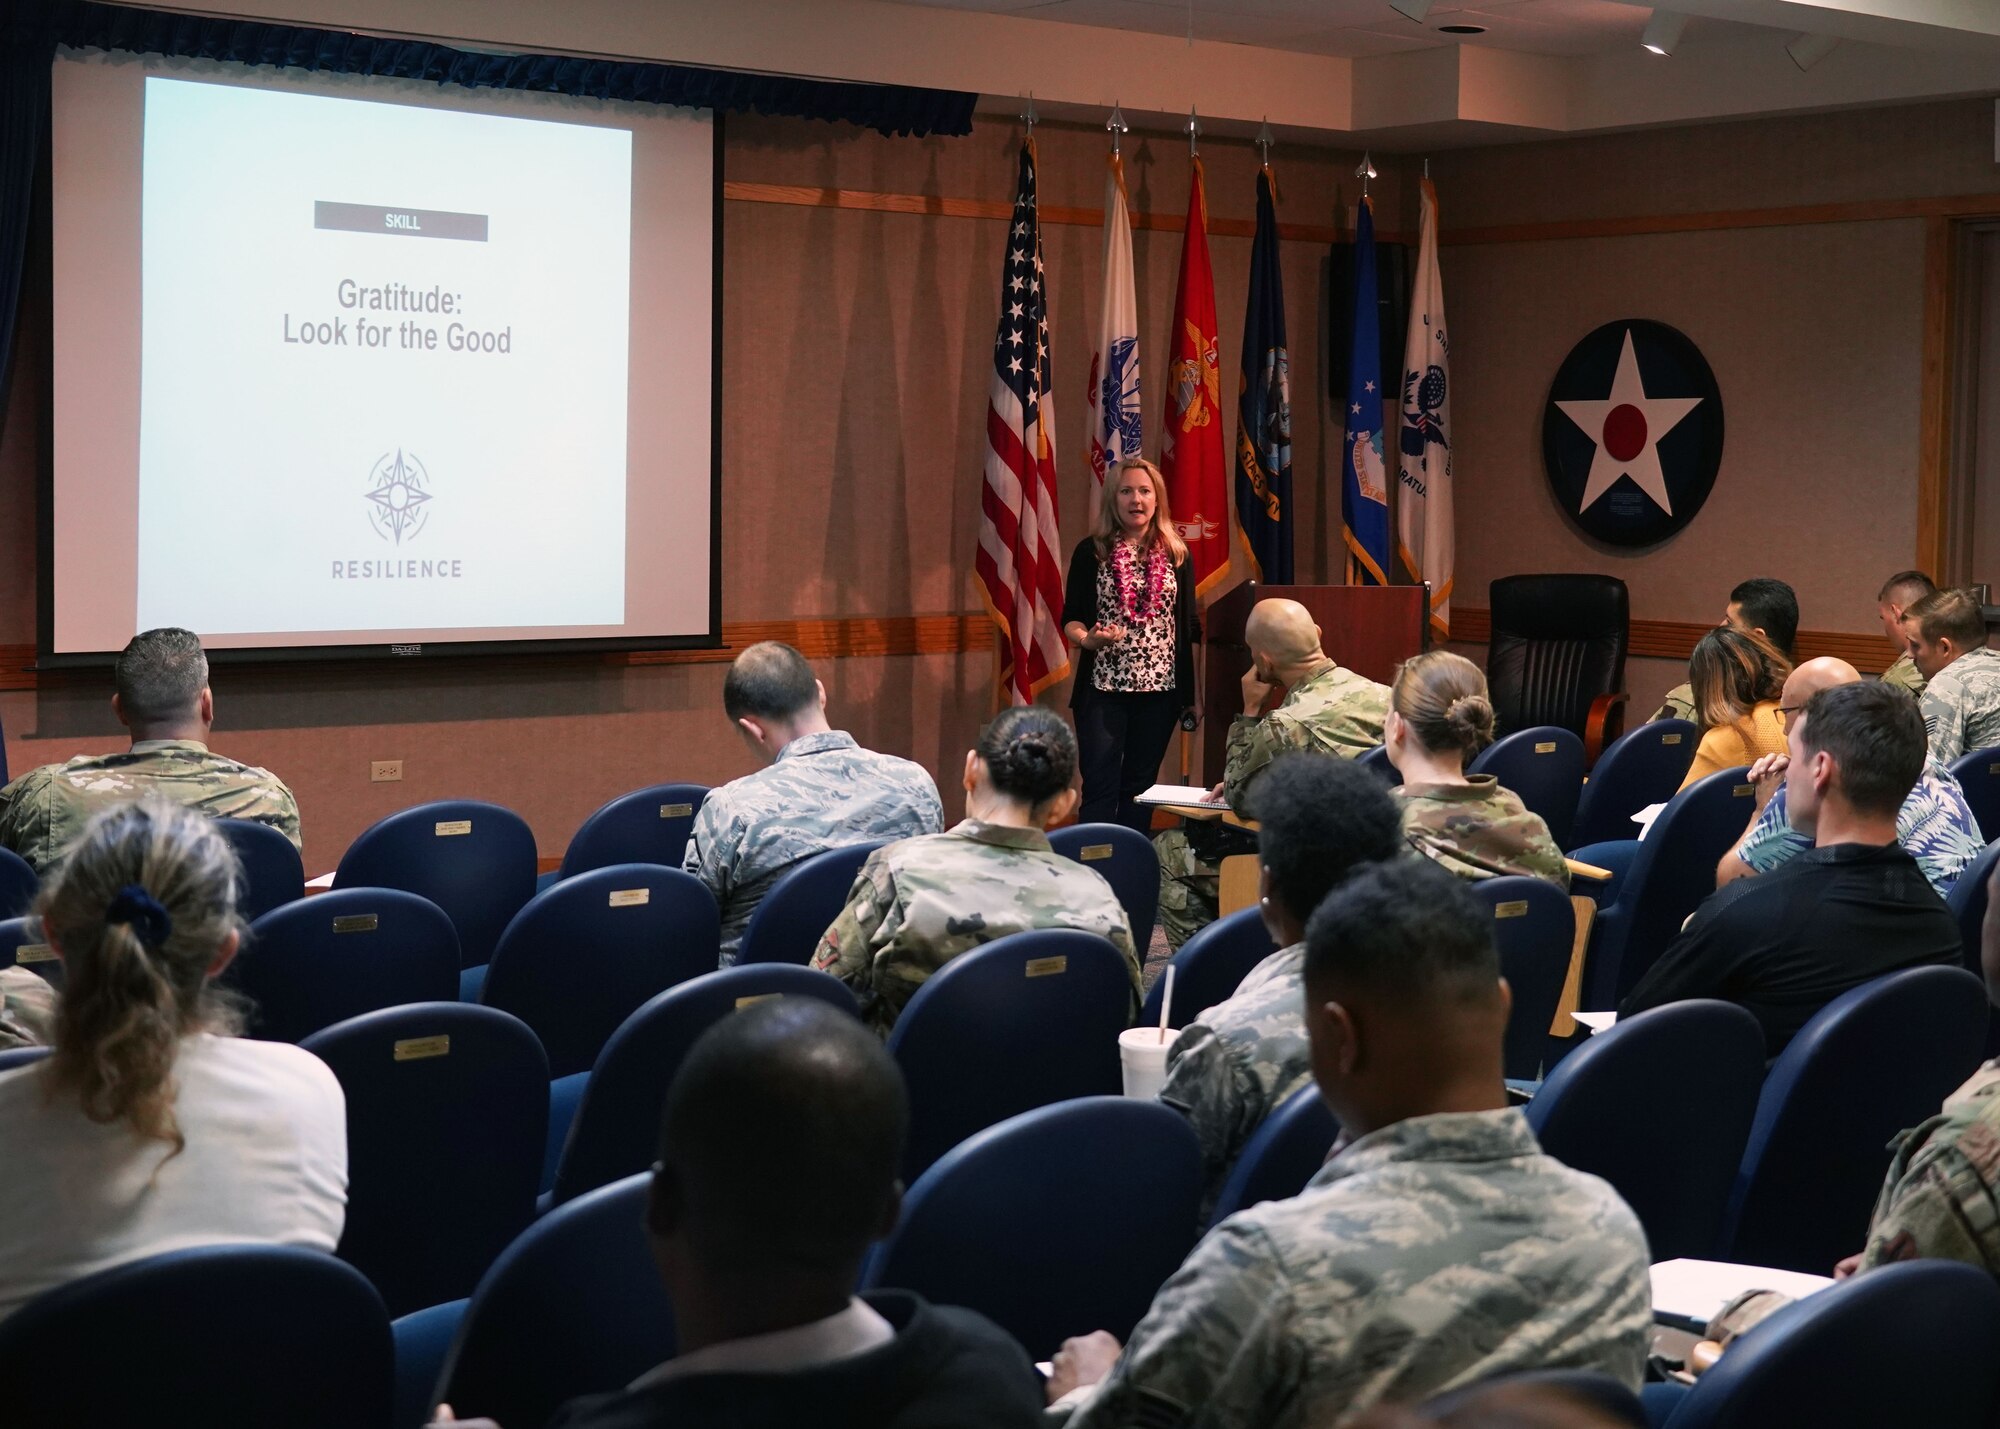 Dr. Jill Antonishak guides a seminar on resilient thinking on Joint Base Pearl Harbor-Hickam, Hawaii, Nov. 19, 2019. She taught three seminars relating to resilience, preventing burnout, and strengthening relationships. (U.S. Air Force photo by Airman 1st Class Erin Baxter)